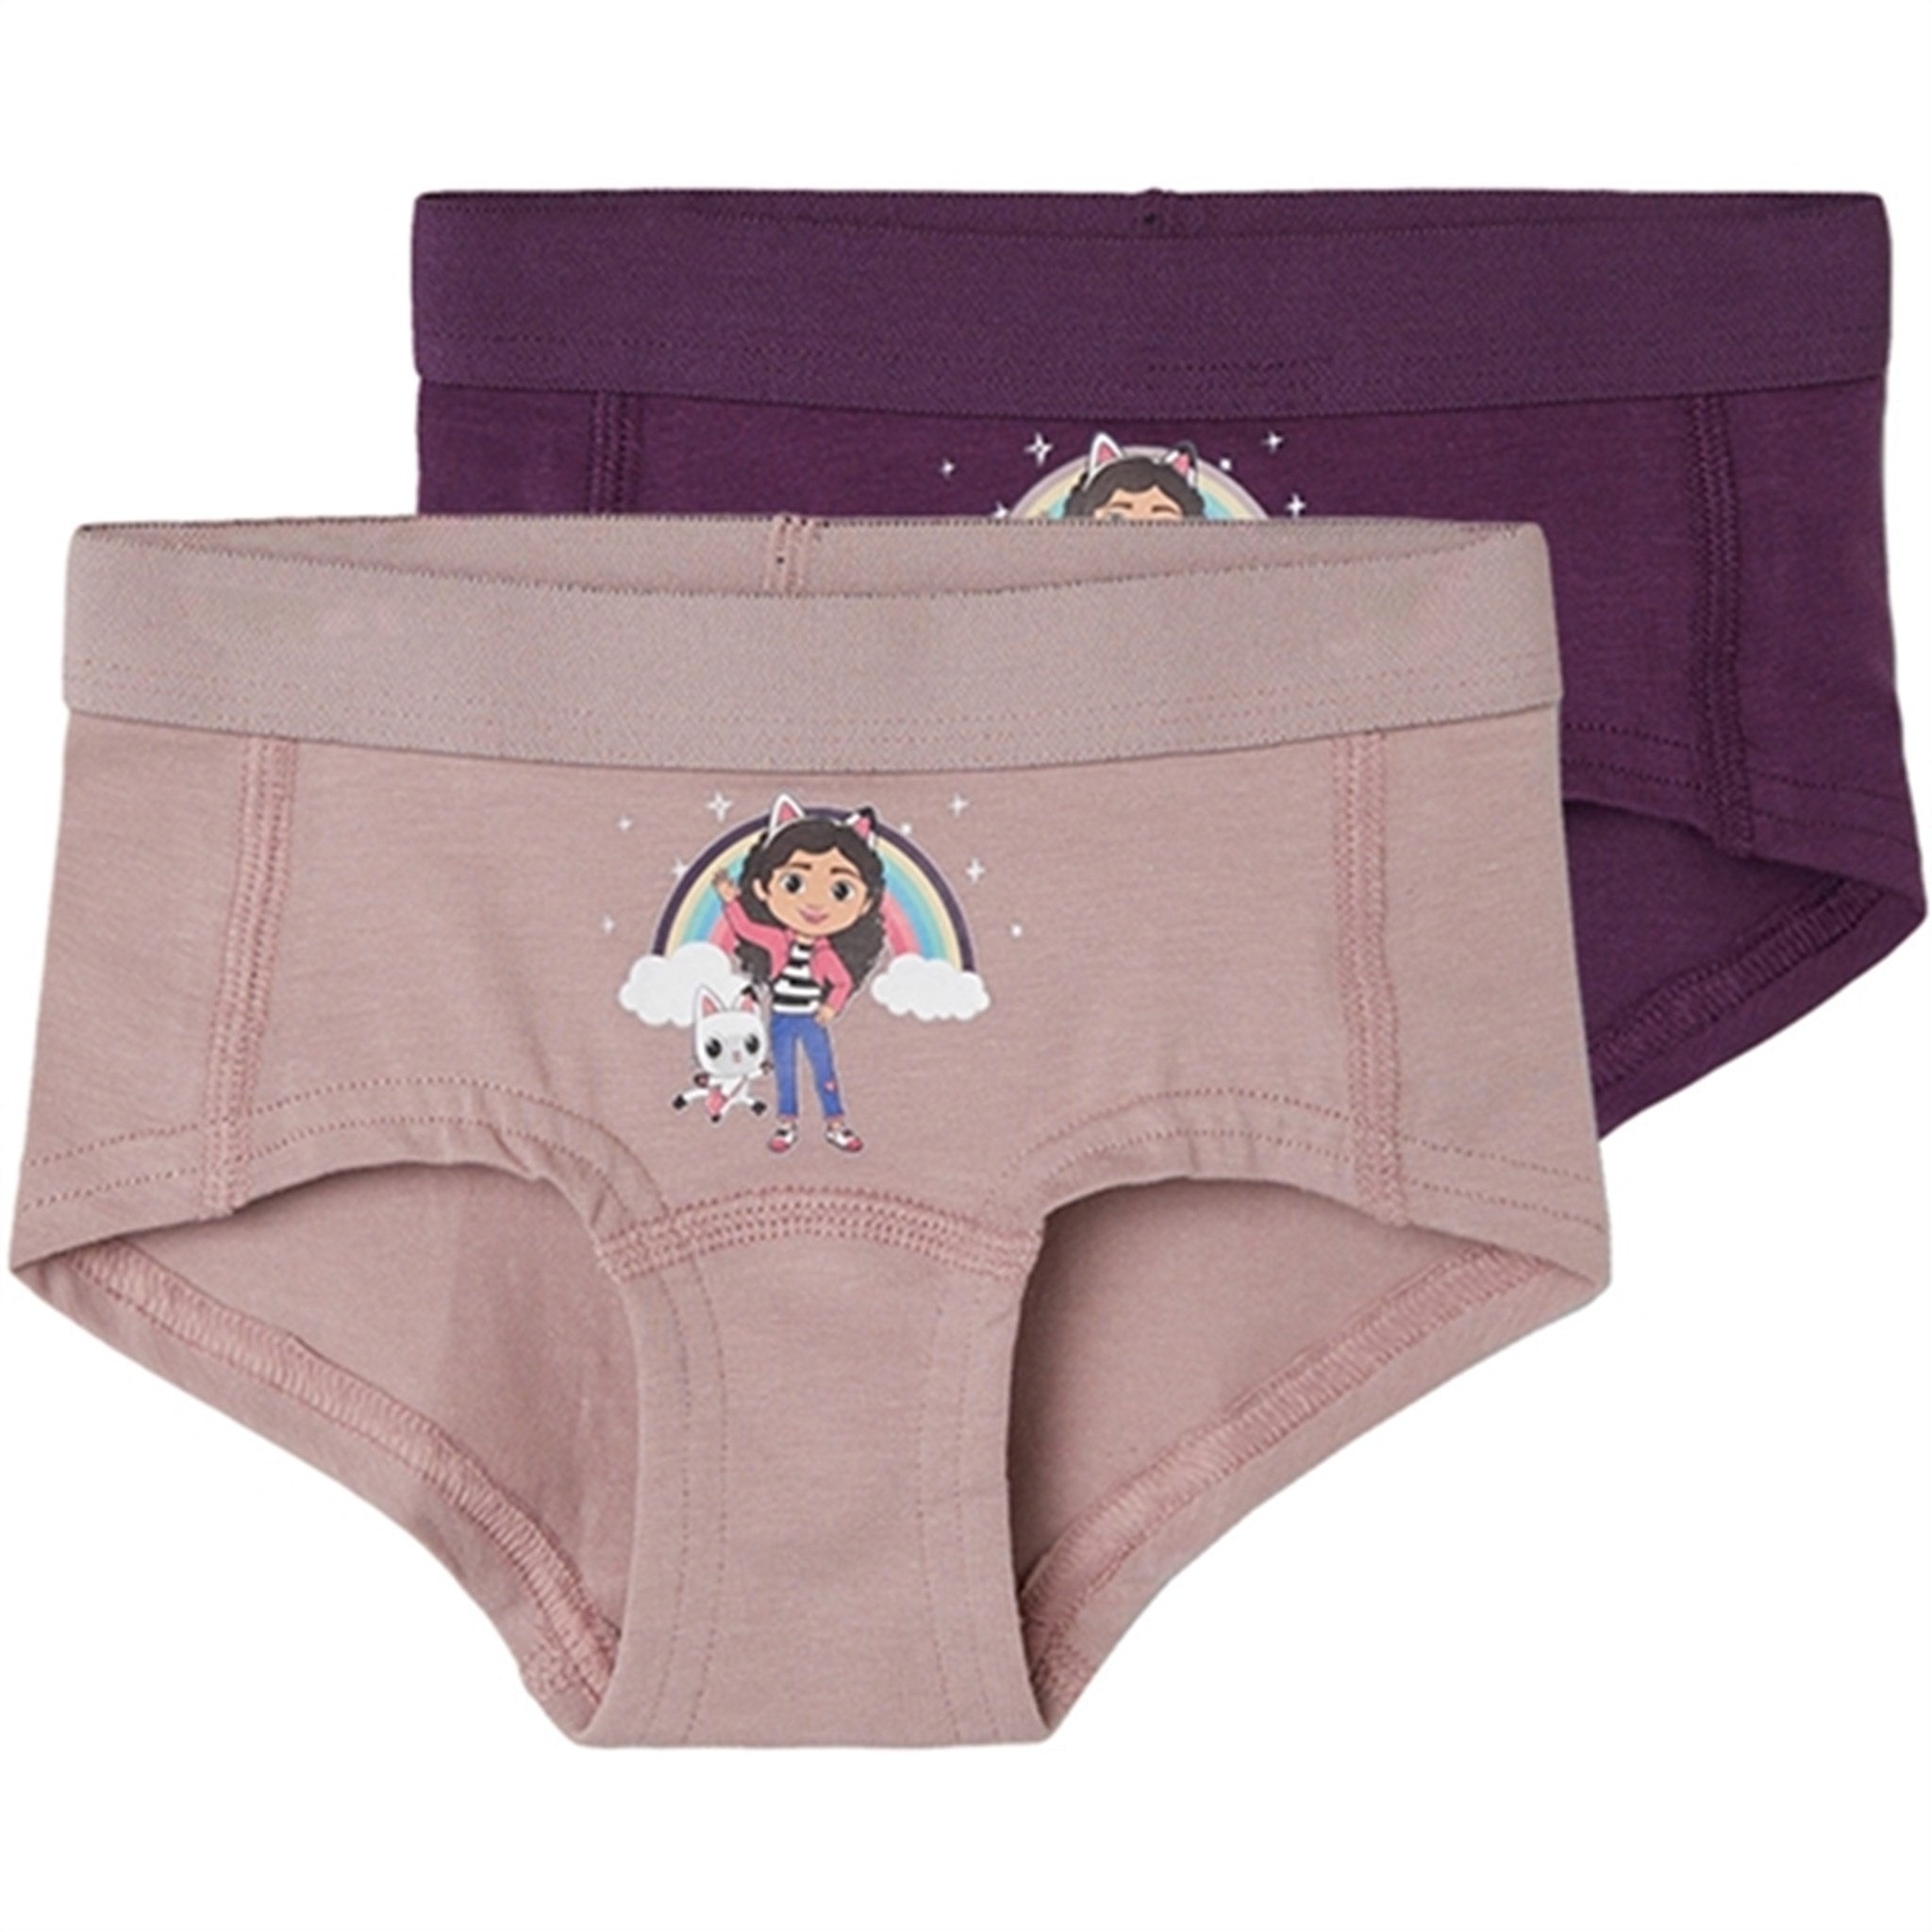 Name it Deauville Mauve Ordi Gaby Hipster 2-pack